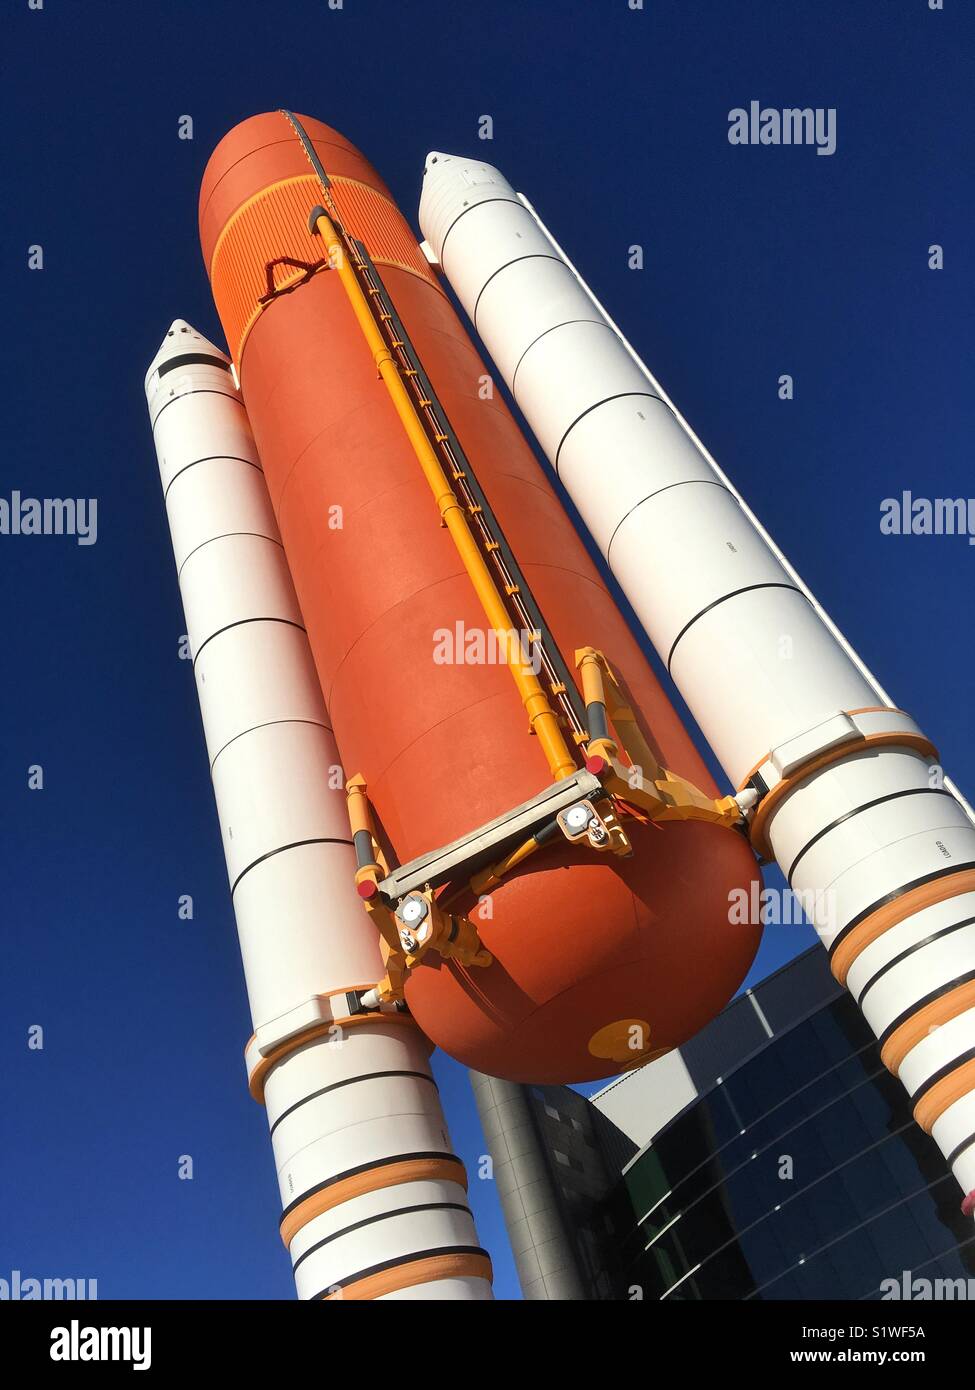 Space Shuttle solid rocket boosters and external fuel tank on display at Kennedy Space Center Visitor Complex. Stock Photo